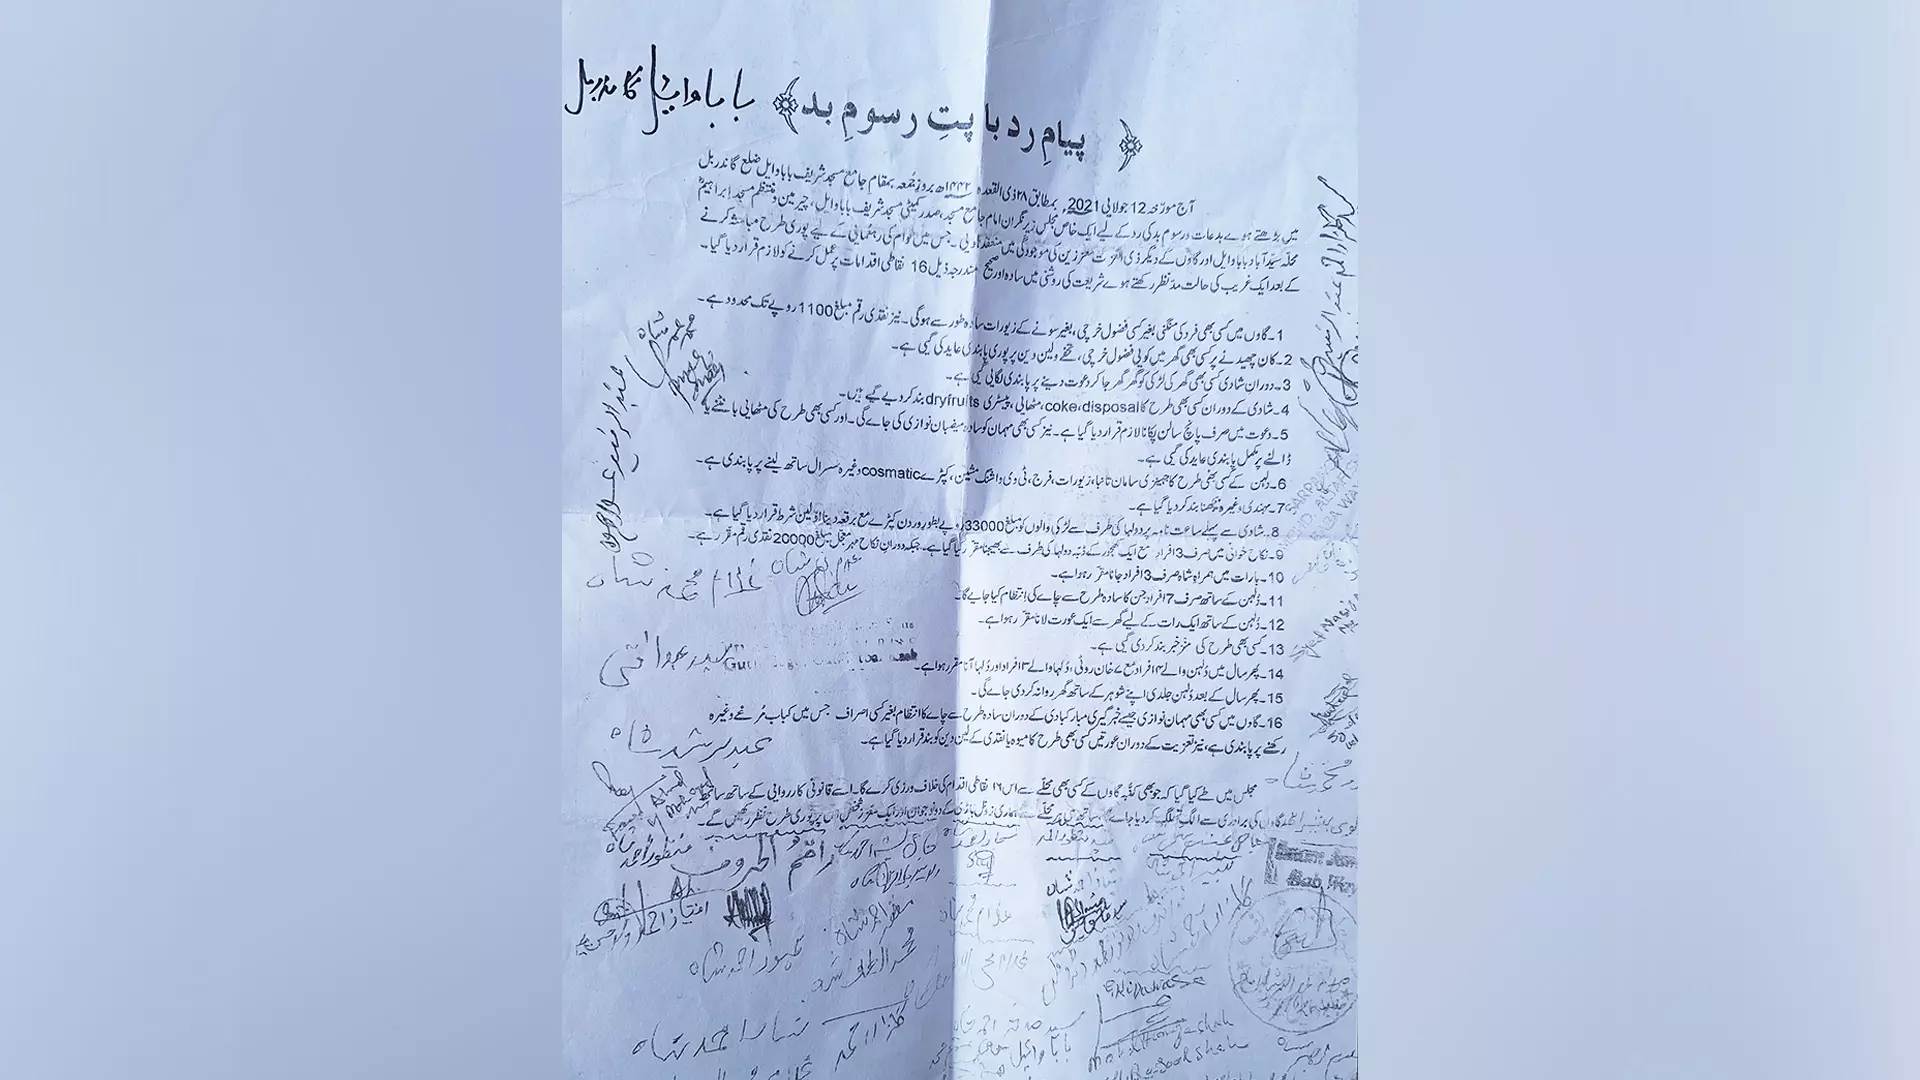 The document with guidelines for weddings in Baba Wayil. 